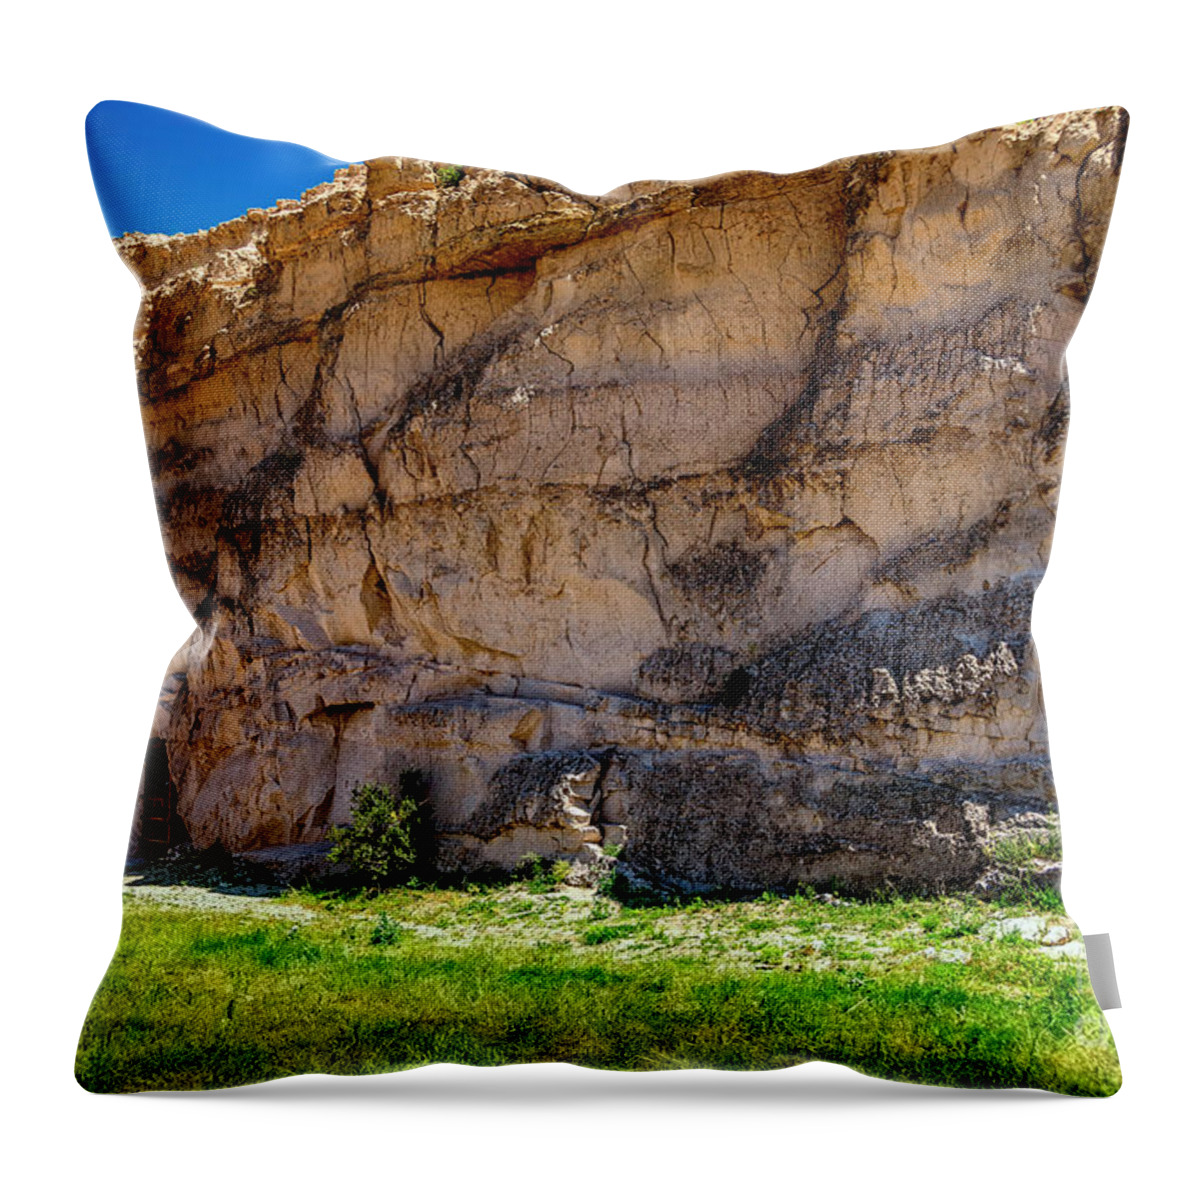 Register Cliff Throw Pillow featuring the photograph Register Cliff by Jon Burch Photography